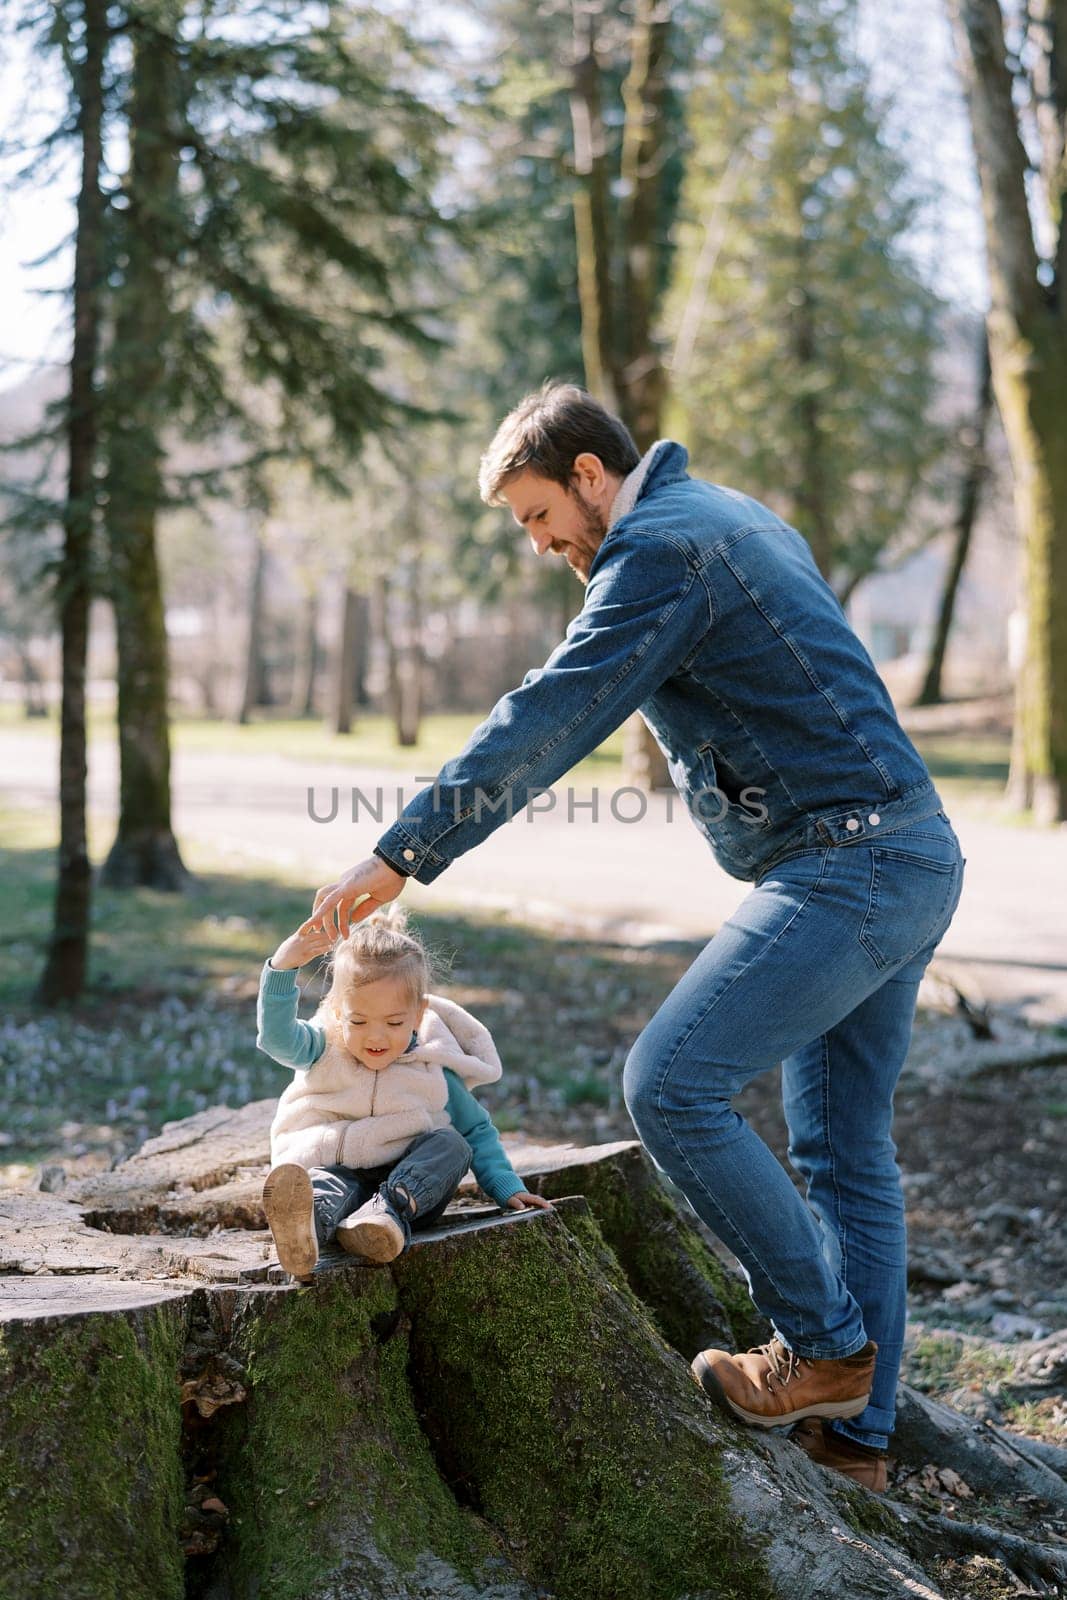 Dad stands near a huge stump in the forest with a little girl sitting on it holding her hand. High quality photo